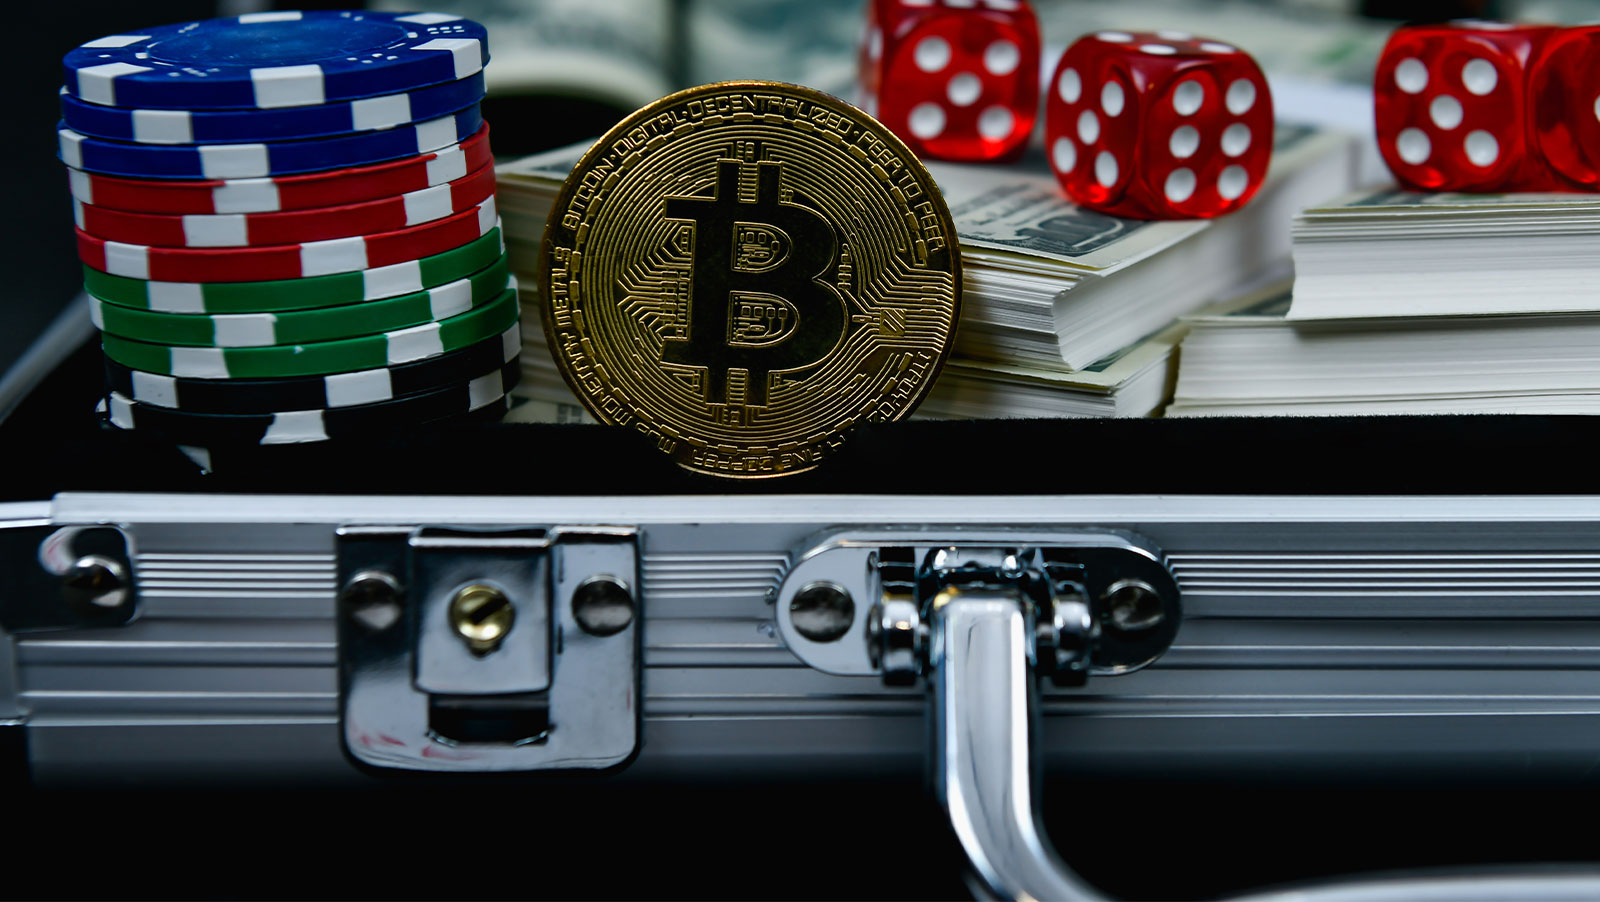 Zero Fee 1xbit Makes It Easy To Bet With Bitcoin Cash As Account - 